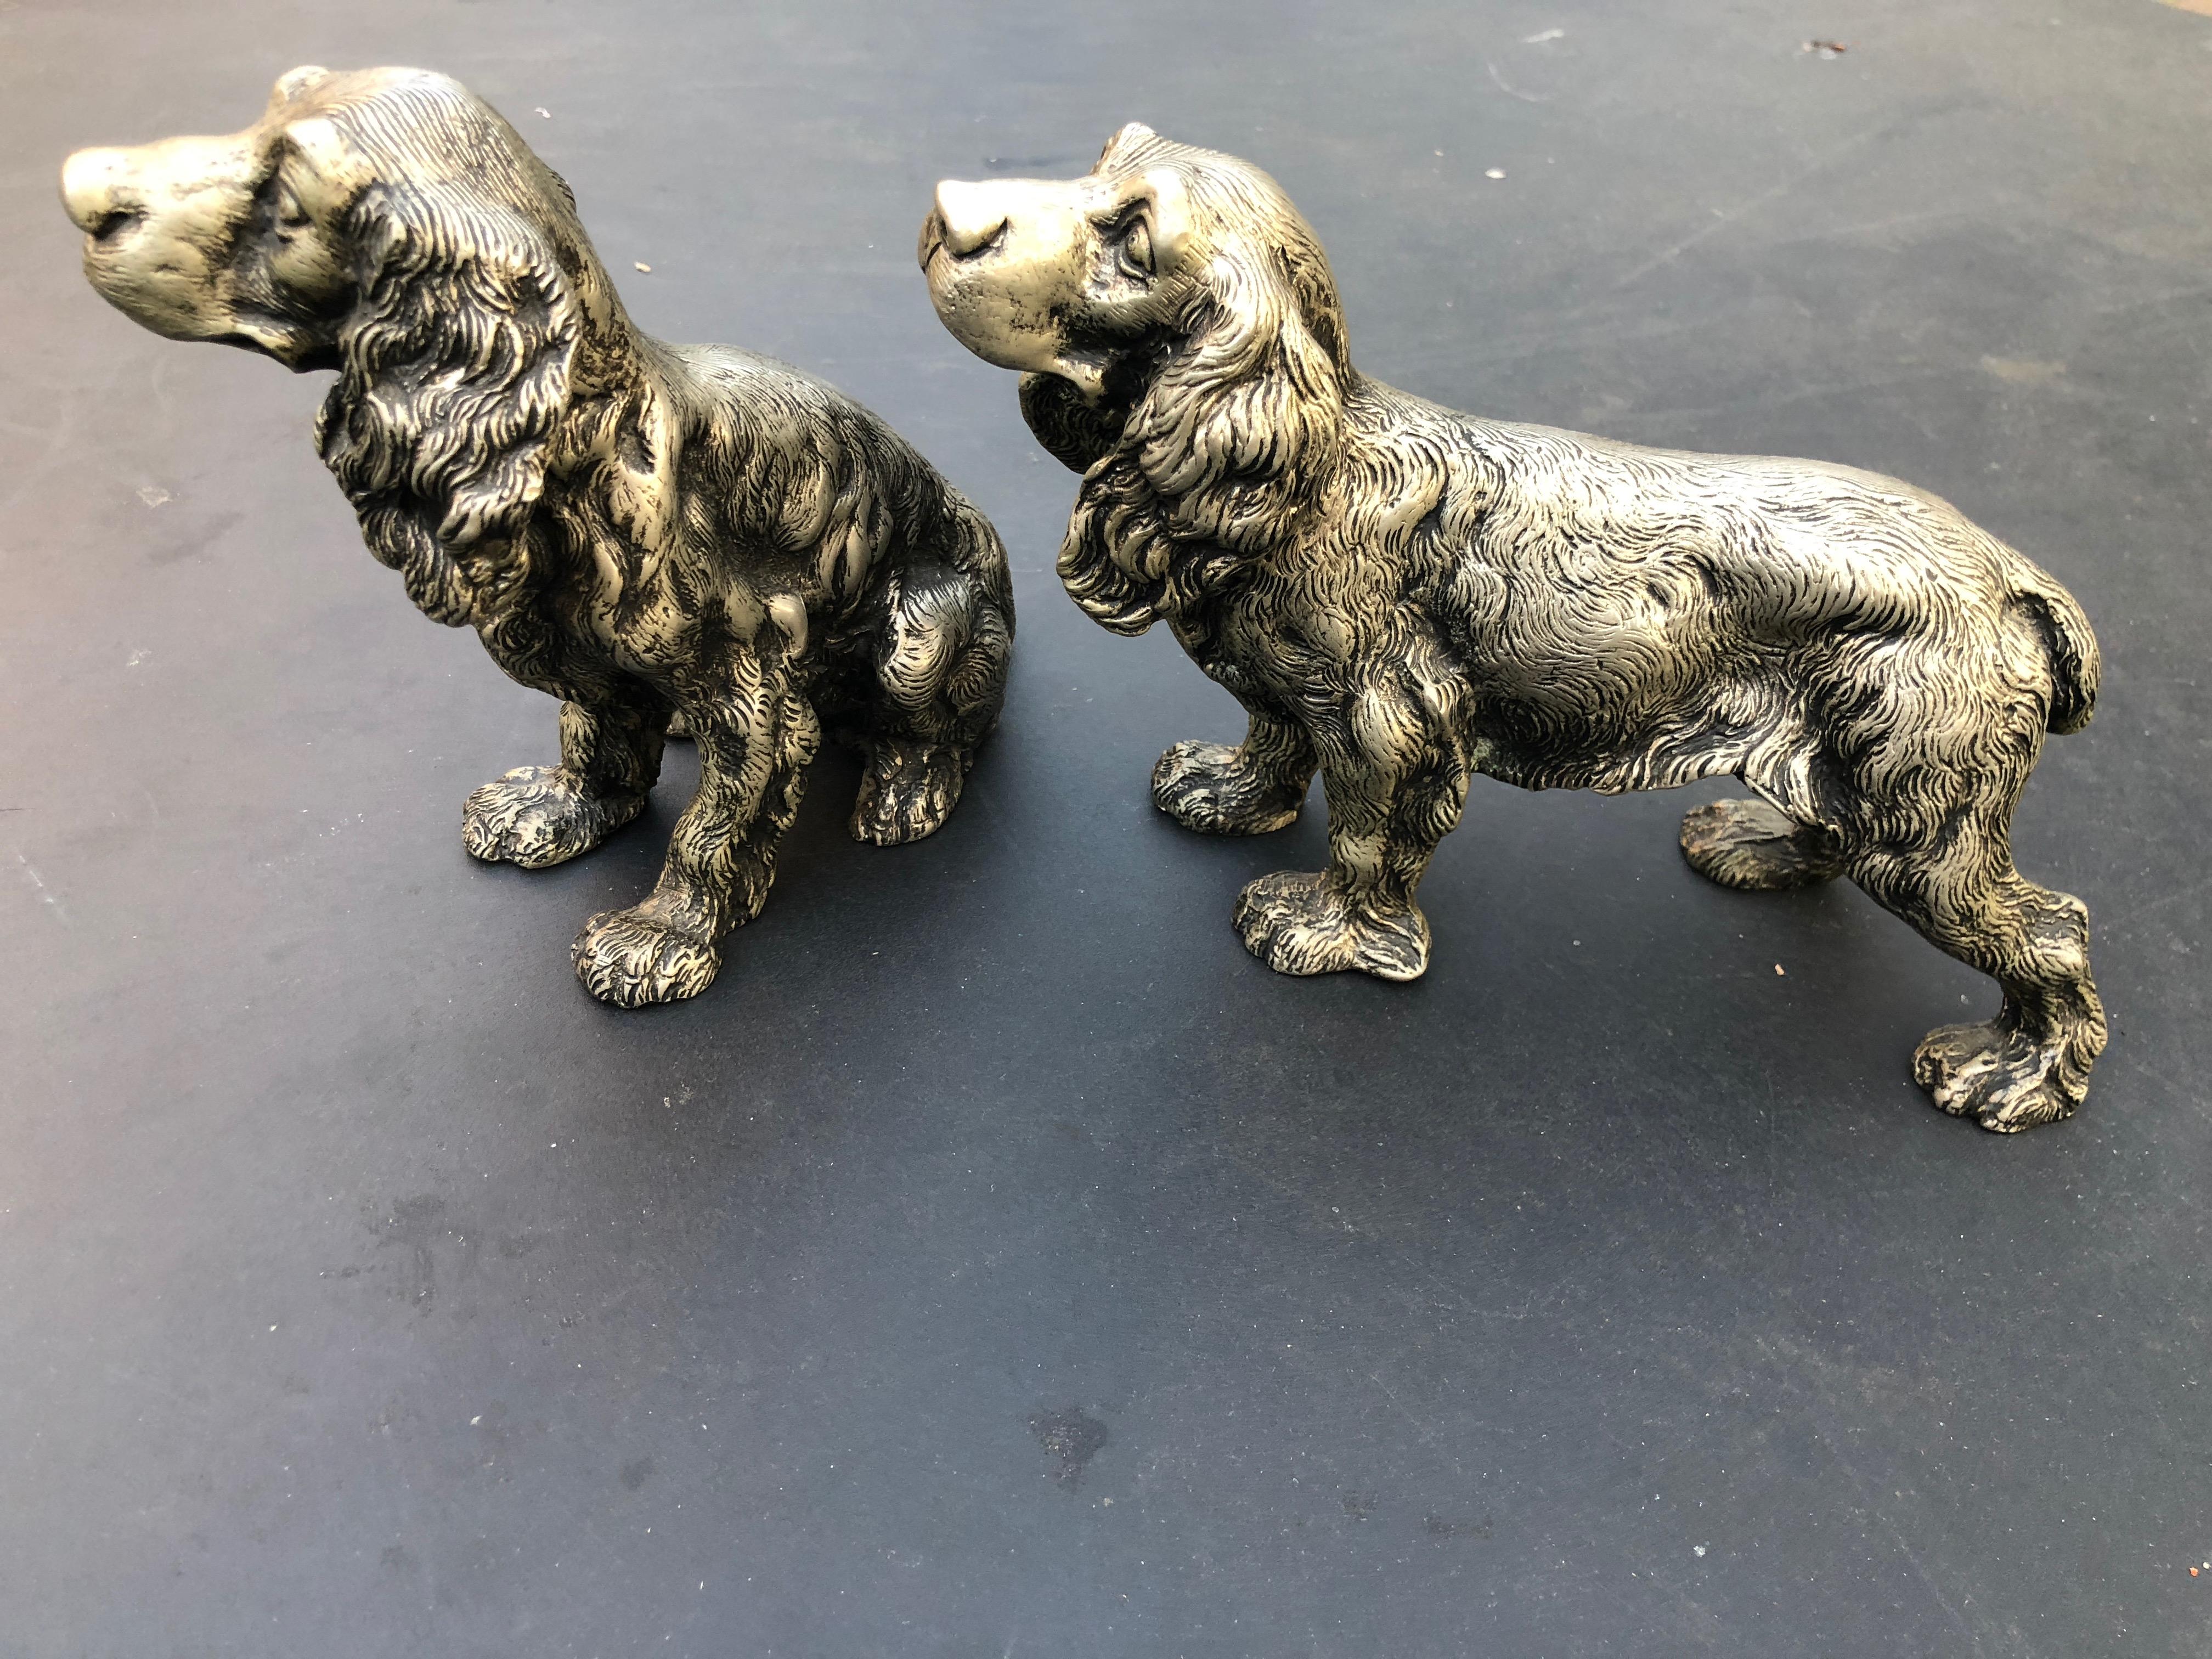 Gucci Large Vintage Oxidized Silver Tone Spaniel Table Top Sculptures or Door Stops.
1970's Gucci , these are substantial, and weigh a lot. Perhaps they were door stops?
Signed Gucci Italy on each sculpture.
Sitting spaniel 6